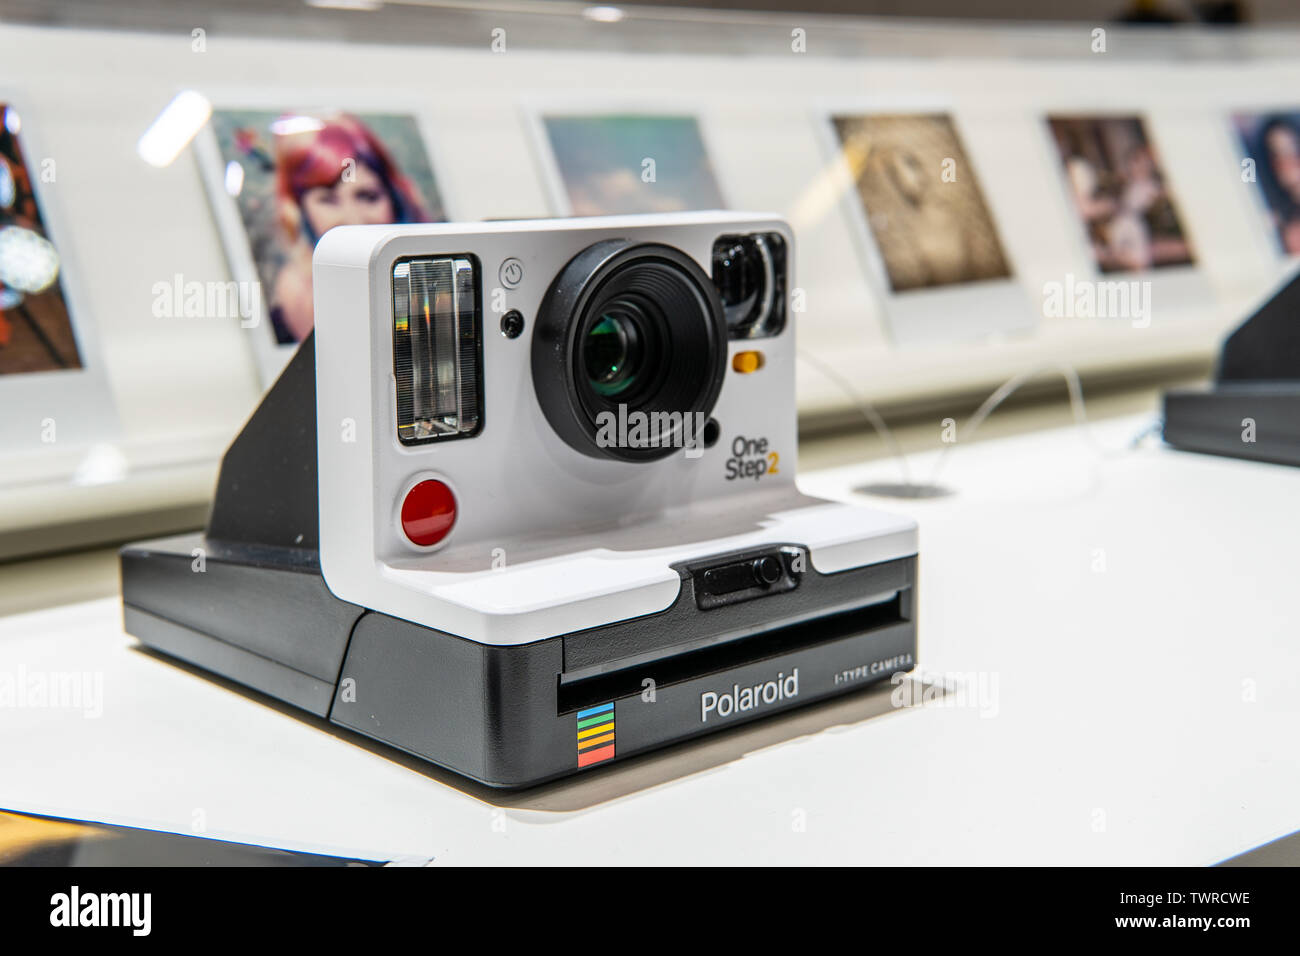 Berlin, Germany, August 29, 2018, Polaroid OneStep2 instant camera at  Polaroid exhibition pavilion showroom, stand at Global Innovations Show IFA  2018 Stock Photo - Alamy